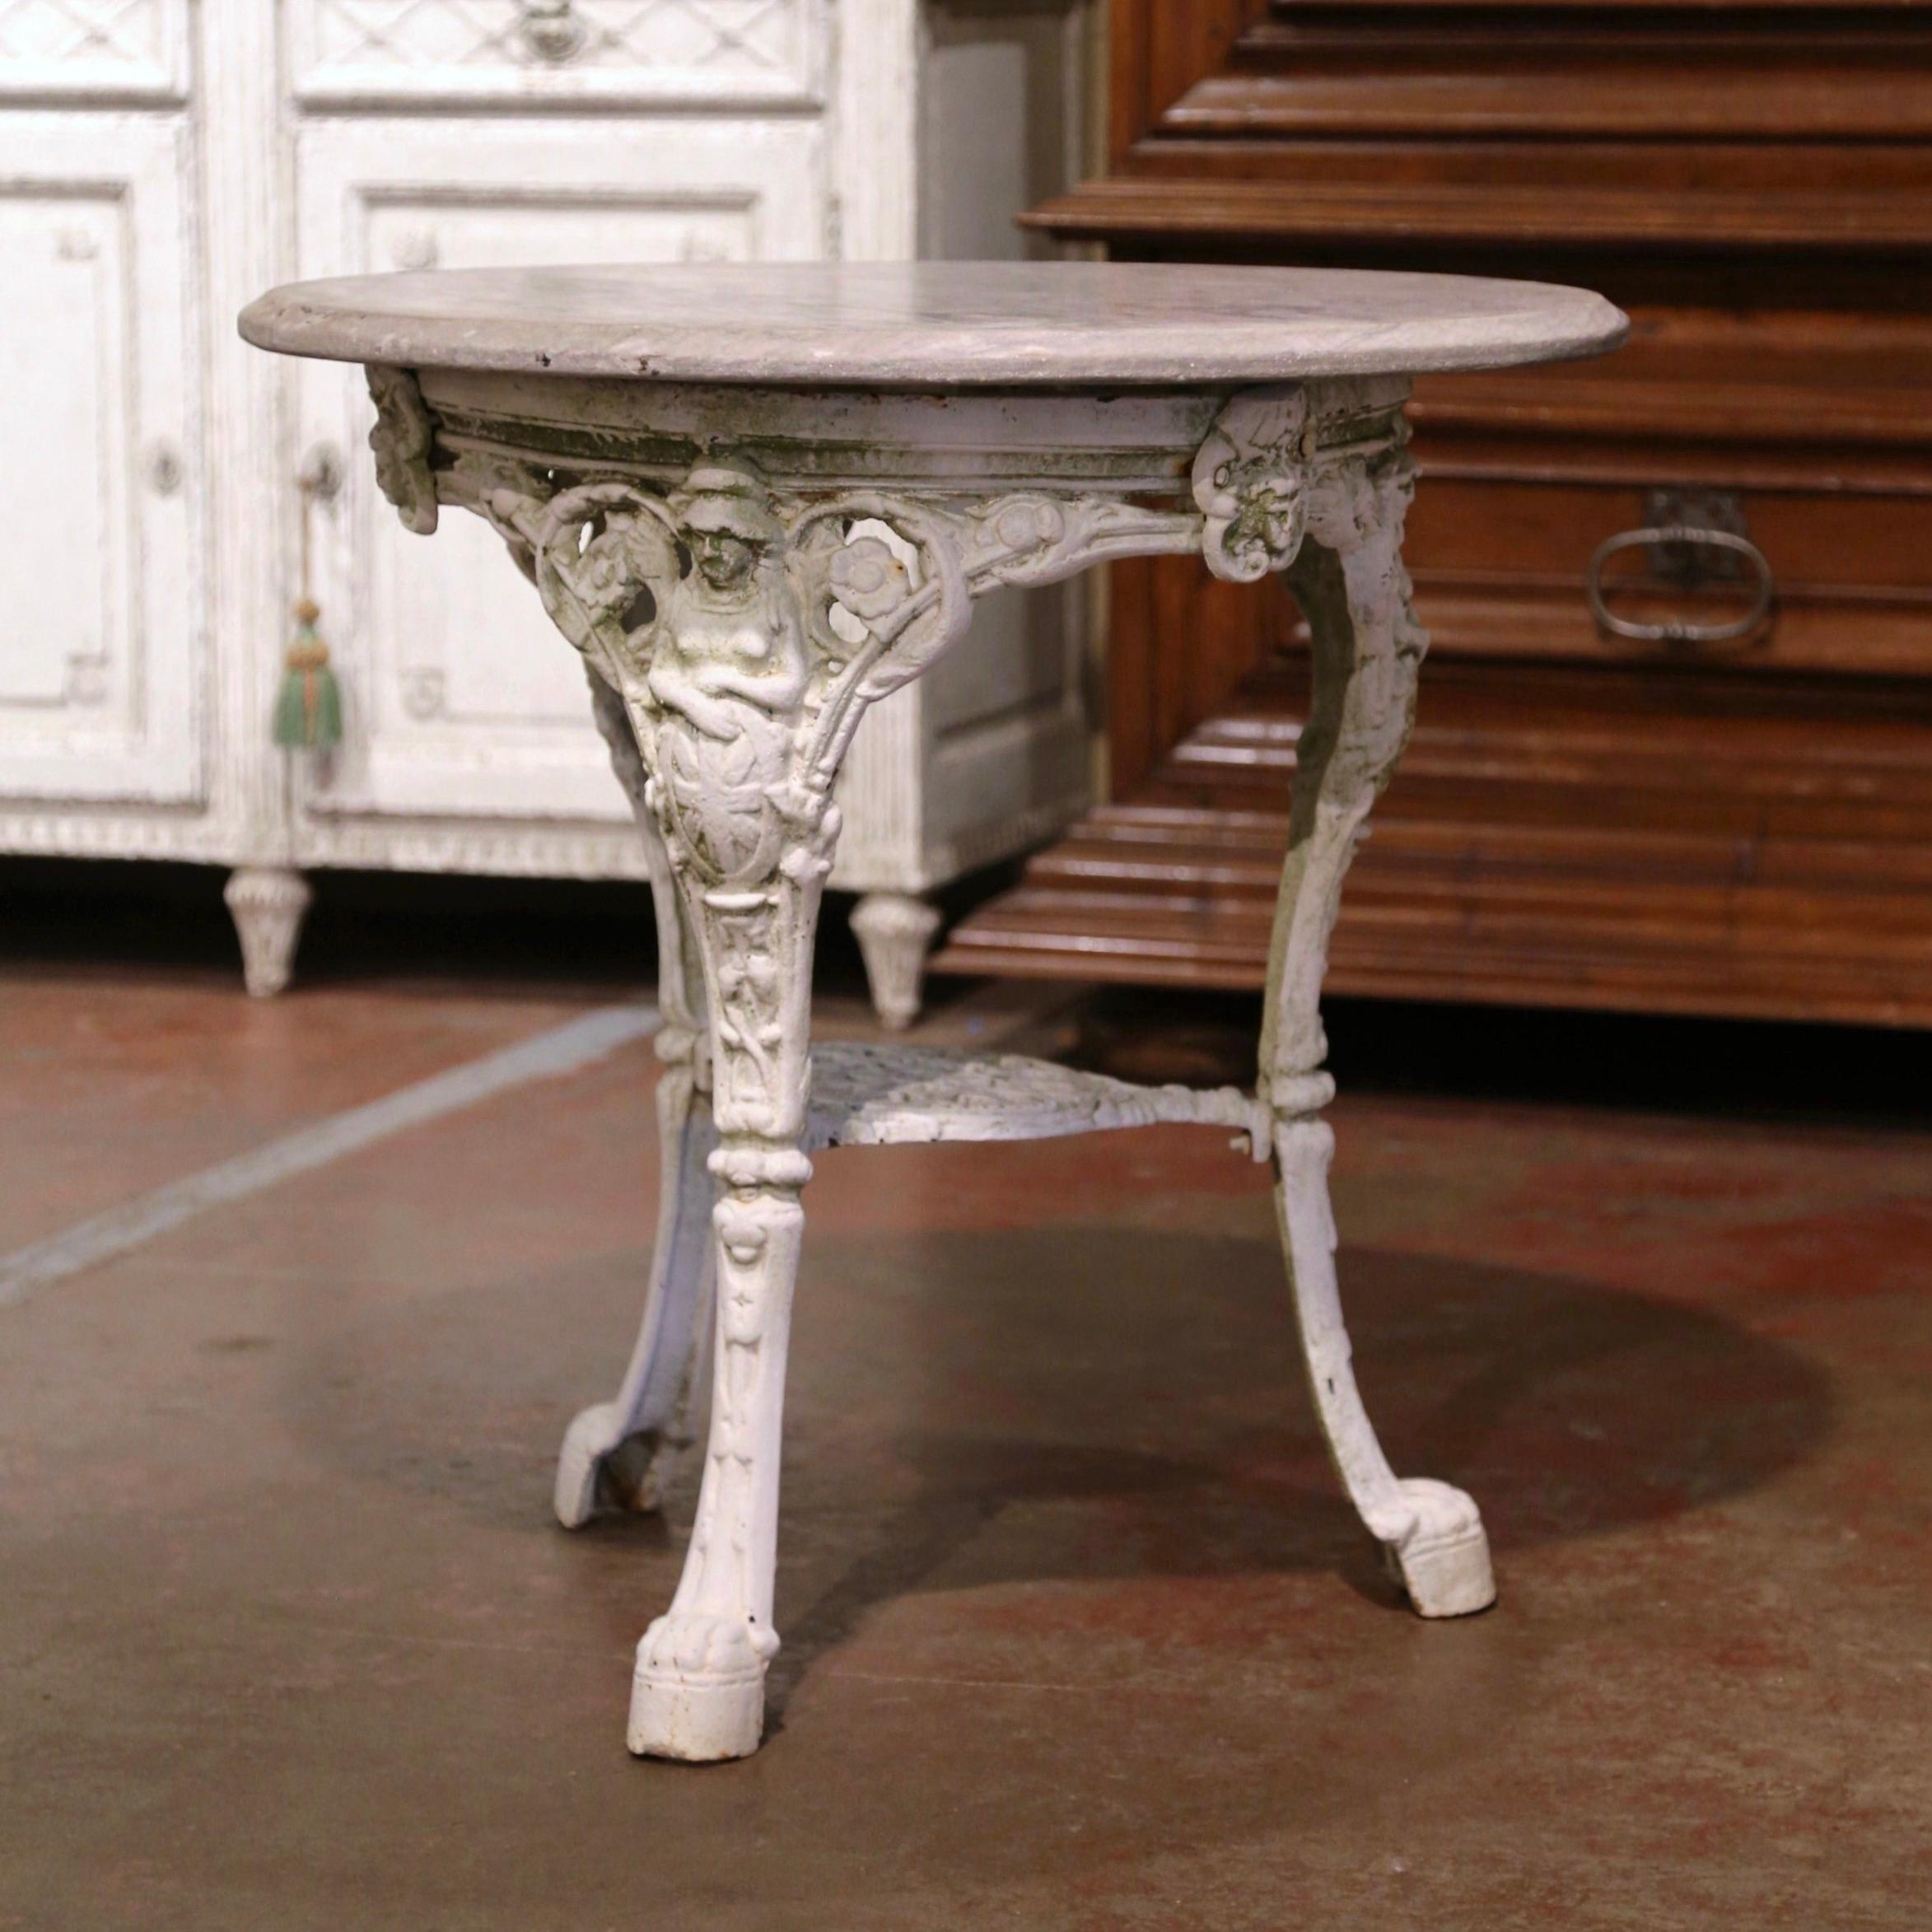 Decorate a patio, a pool area, or sun room with this elegant antique three-leg gueridon table. Crafted in England circa 1880, the pub table stands on three cabriole legs ending with paw feet decorated with female figures at the shoulder; the legs